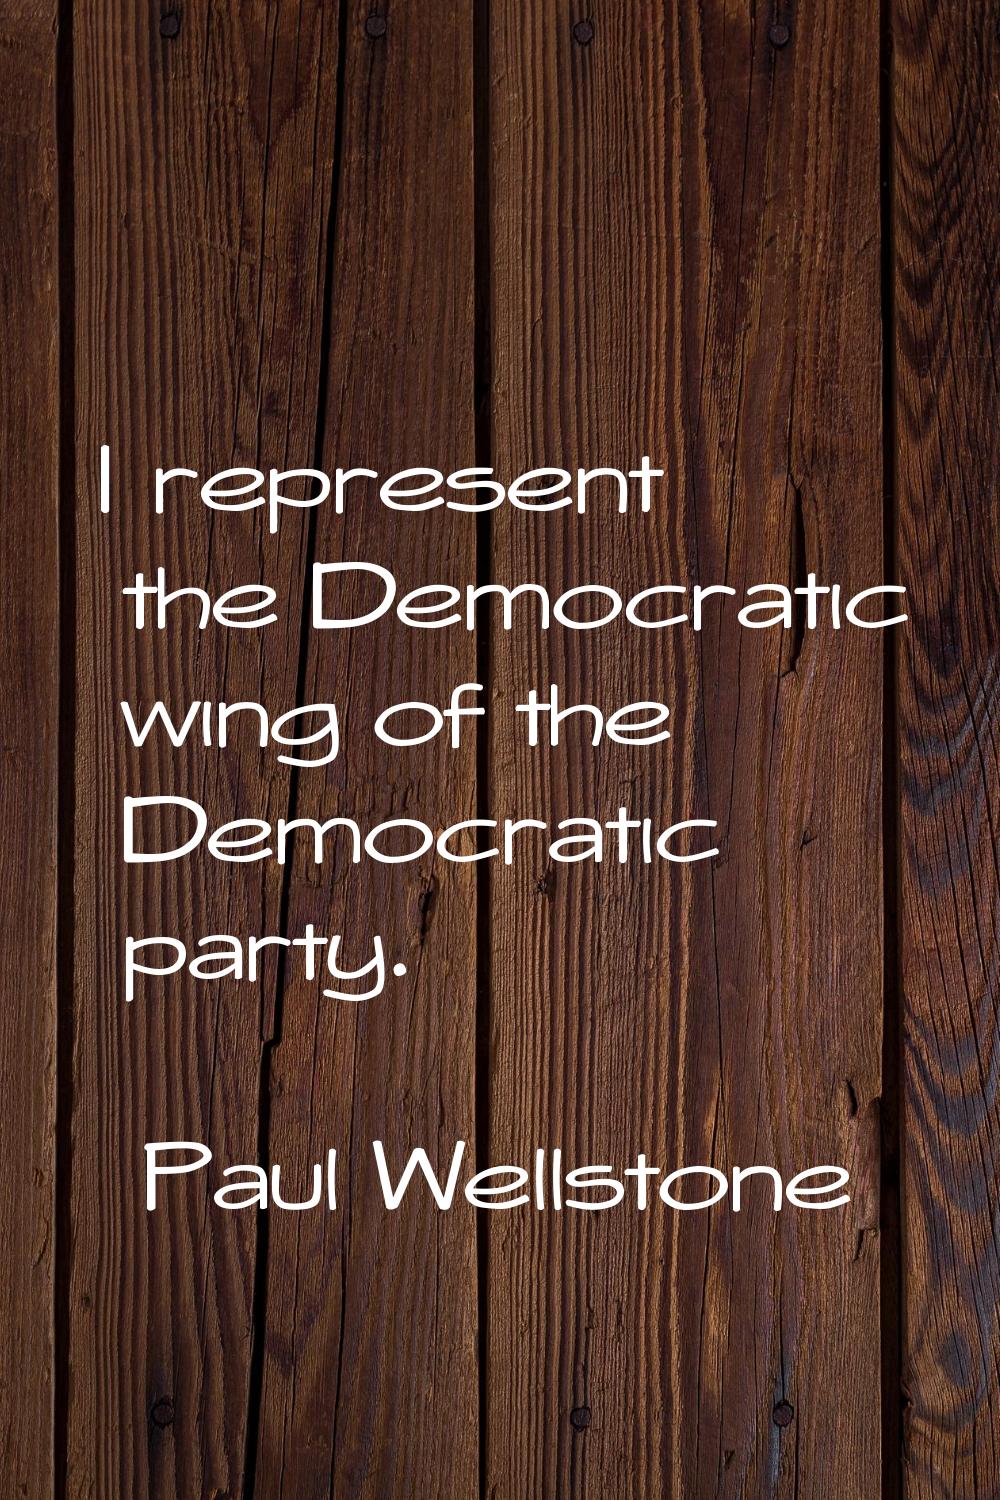 I represent the Democratic wing of the Democratic party.